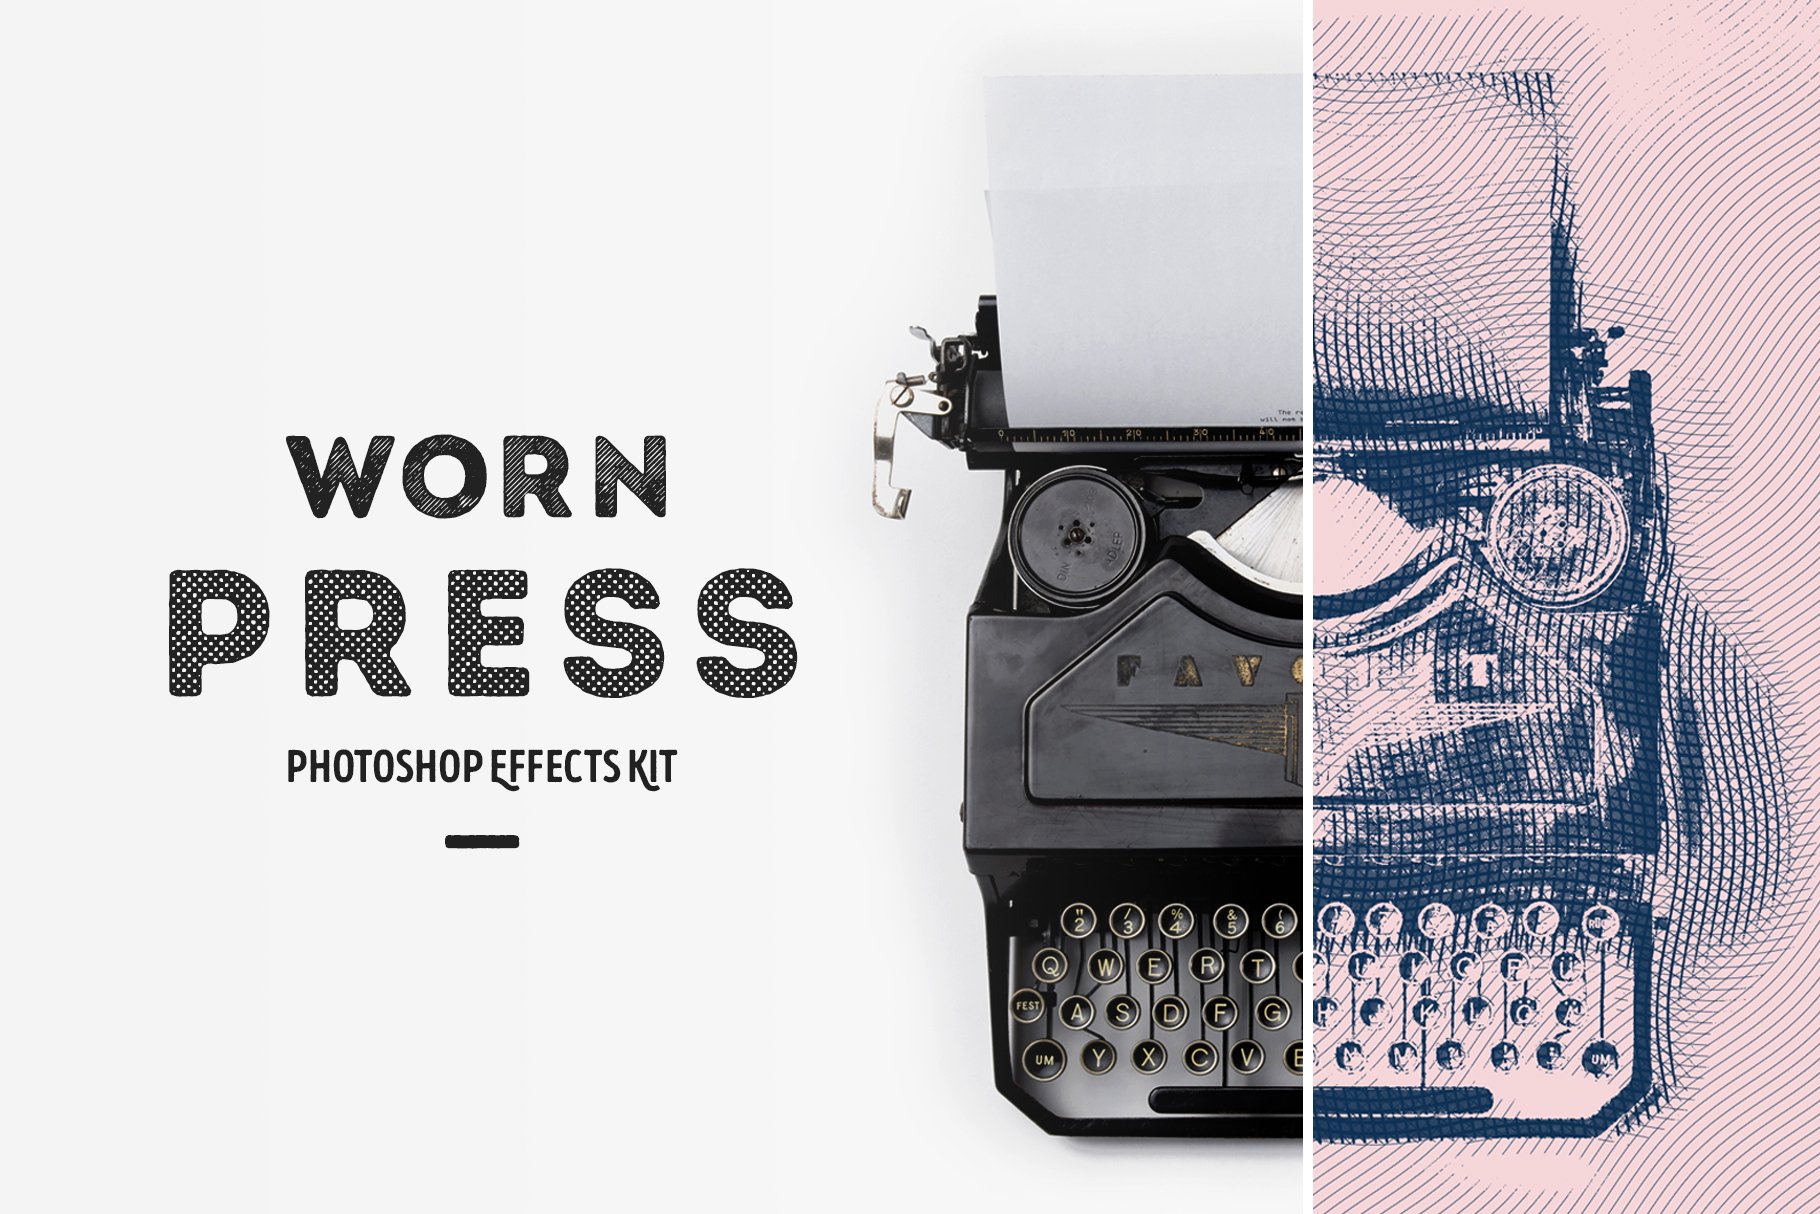 Worn Press Photoshop Effects Kitcover image.